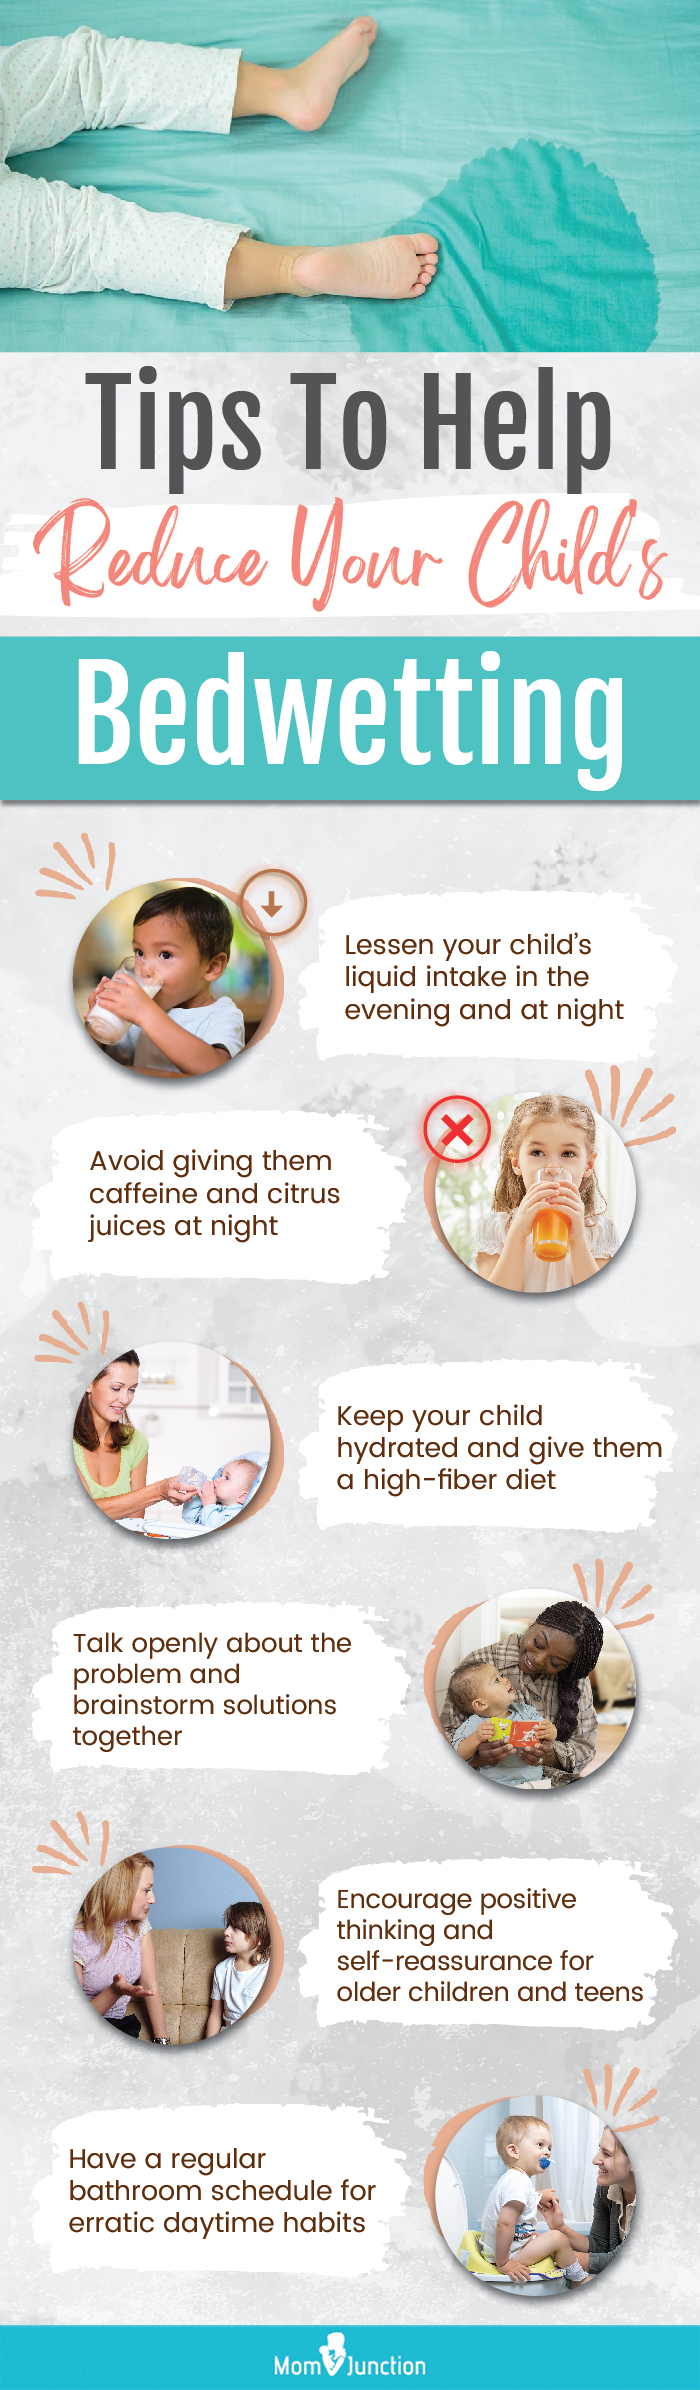 lifestyle changes that might reduce bedwetting in children (infographic)